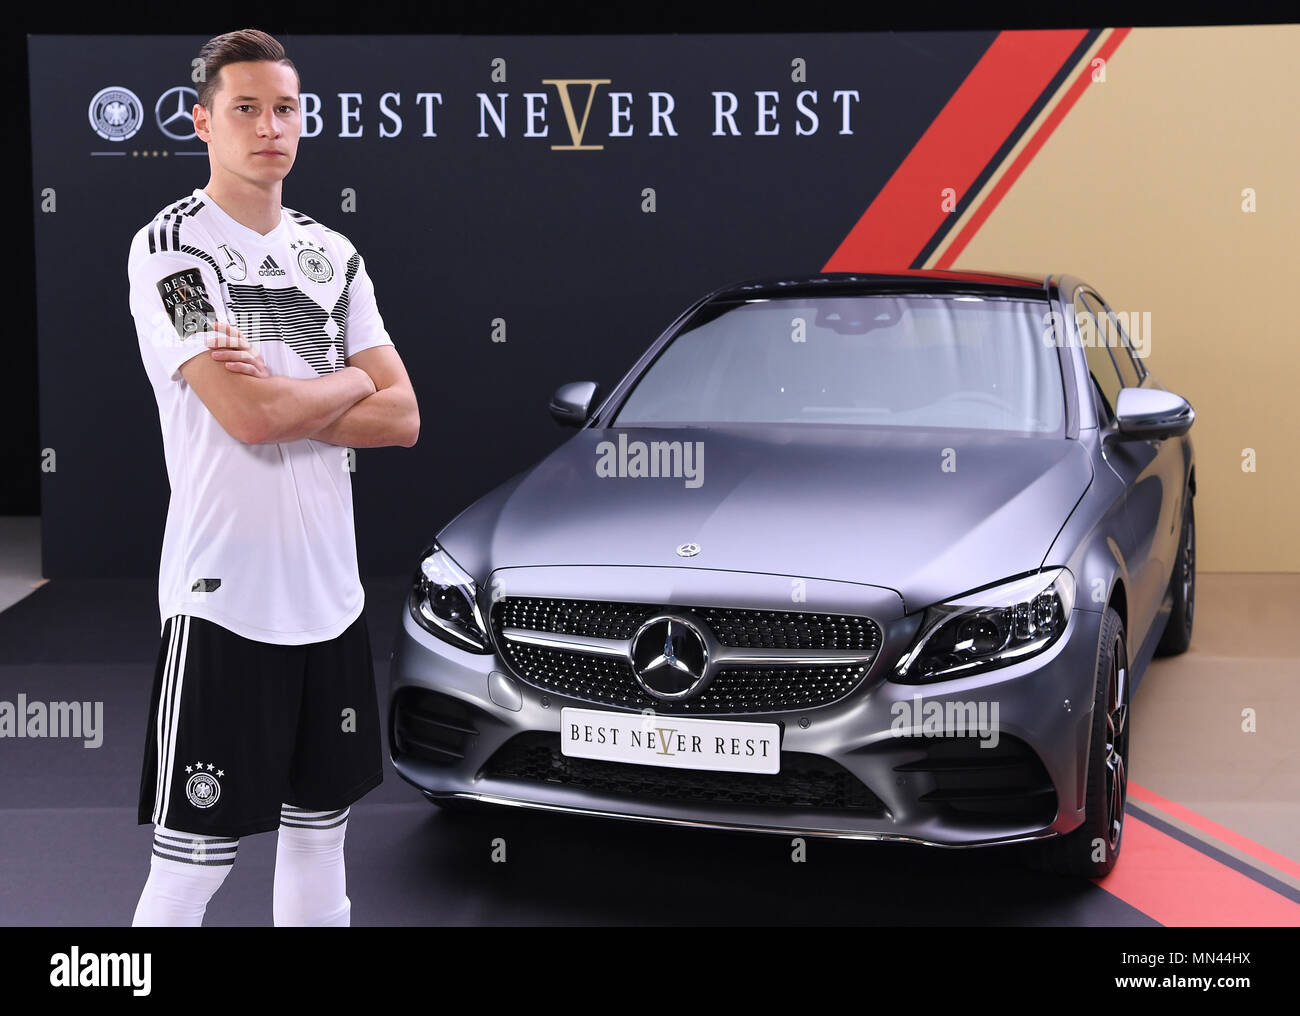 Julian Draxler (Germany) on the Mercedes-Benz C 400 4Matic. Rear: The World  Cup logo of the Mercedes-Benz Generalsupplier (# BEST NEVER REST)  Preview/Archive Image: Topic of the Caderbekanntgabe on 15.05.2018-  GES/Football/DFB Marketing